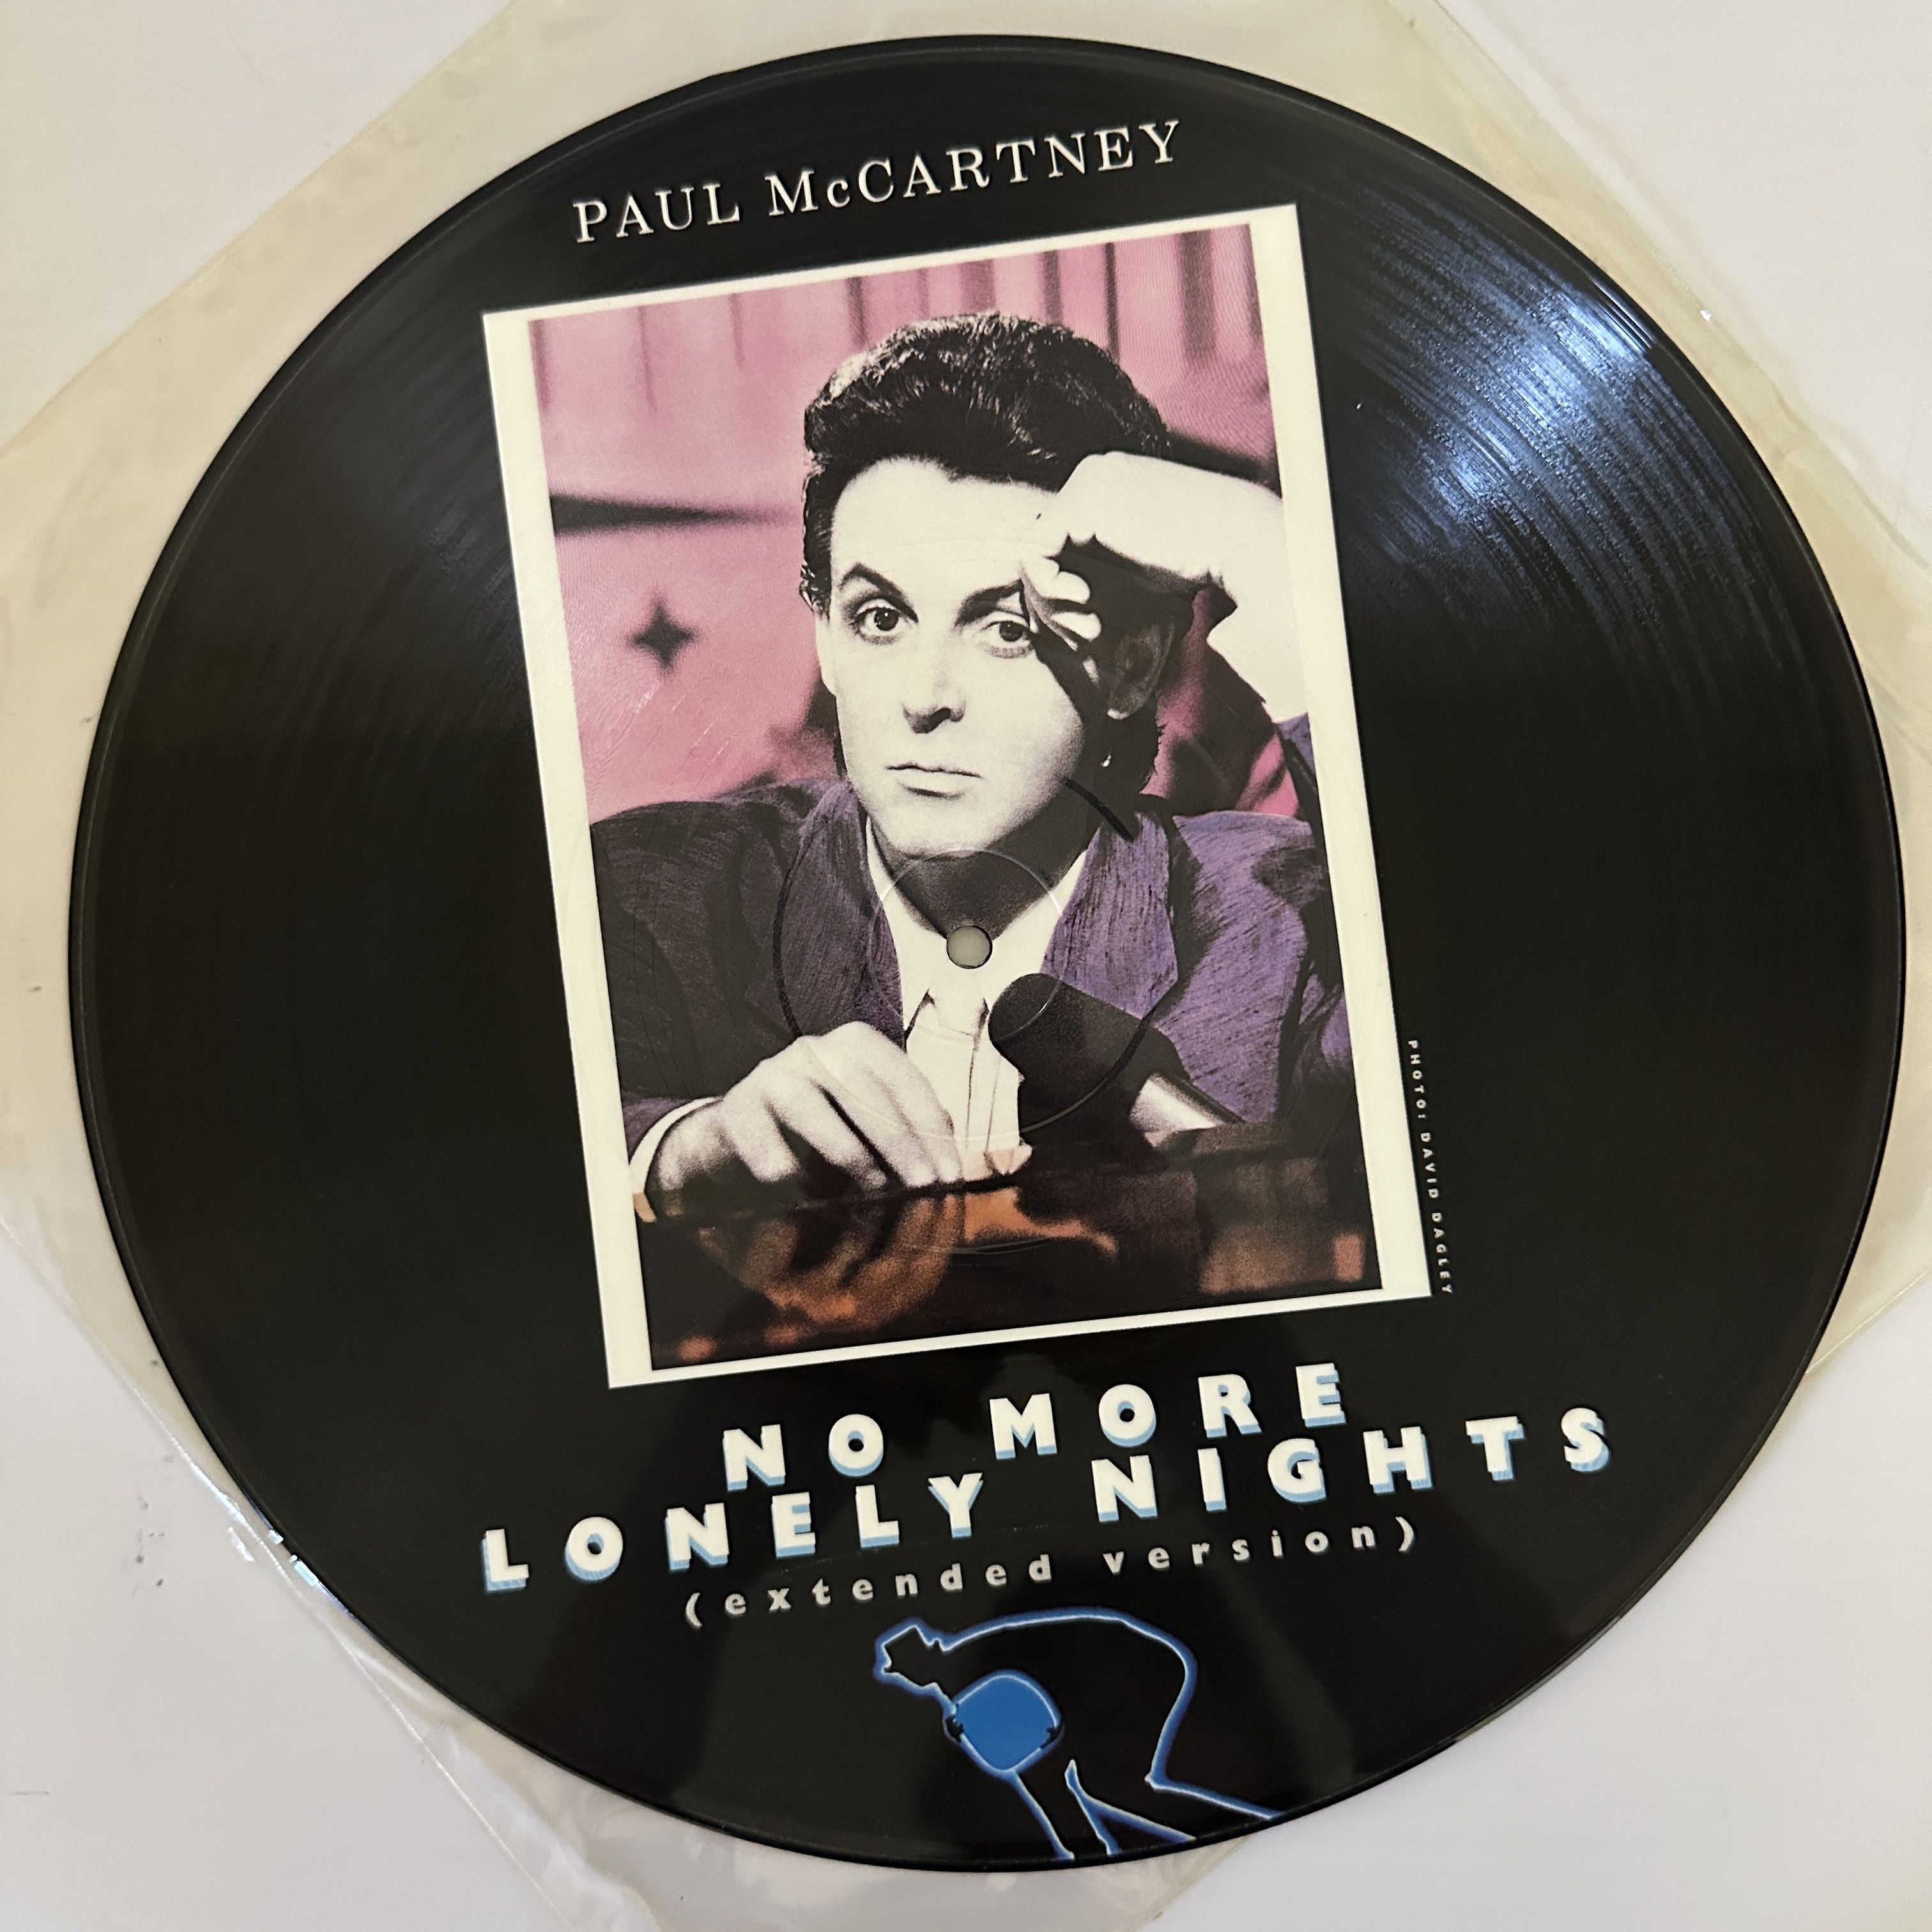 A Paul McCartney and Wings - No More Lonely Nights vinyl Lp - Image 4 of 4